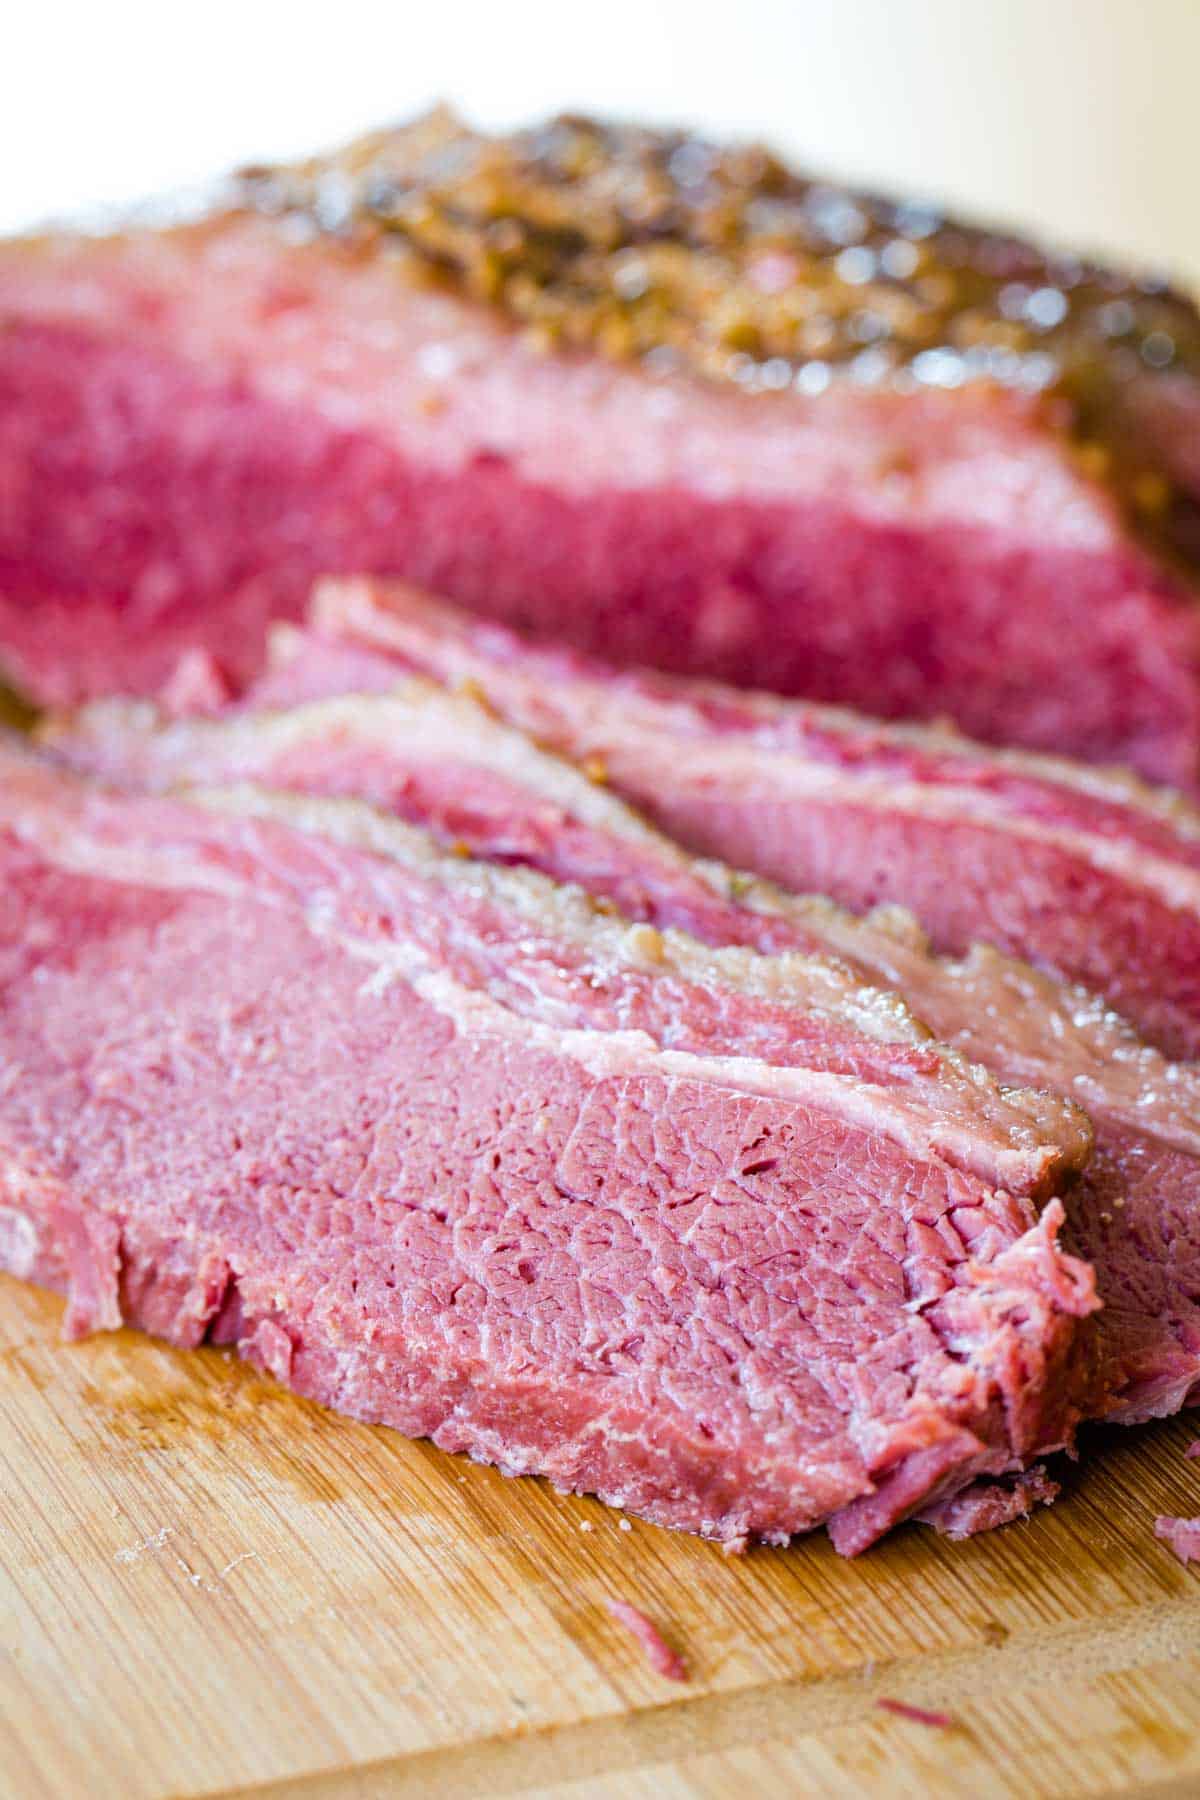 Tender, cooked corned beef brisket that has been sliced into thin pieces.